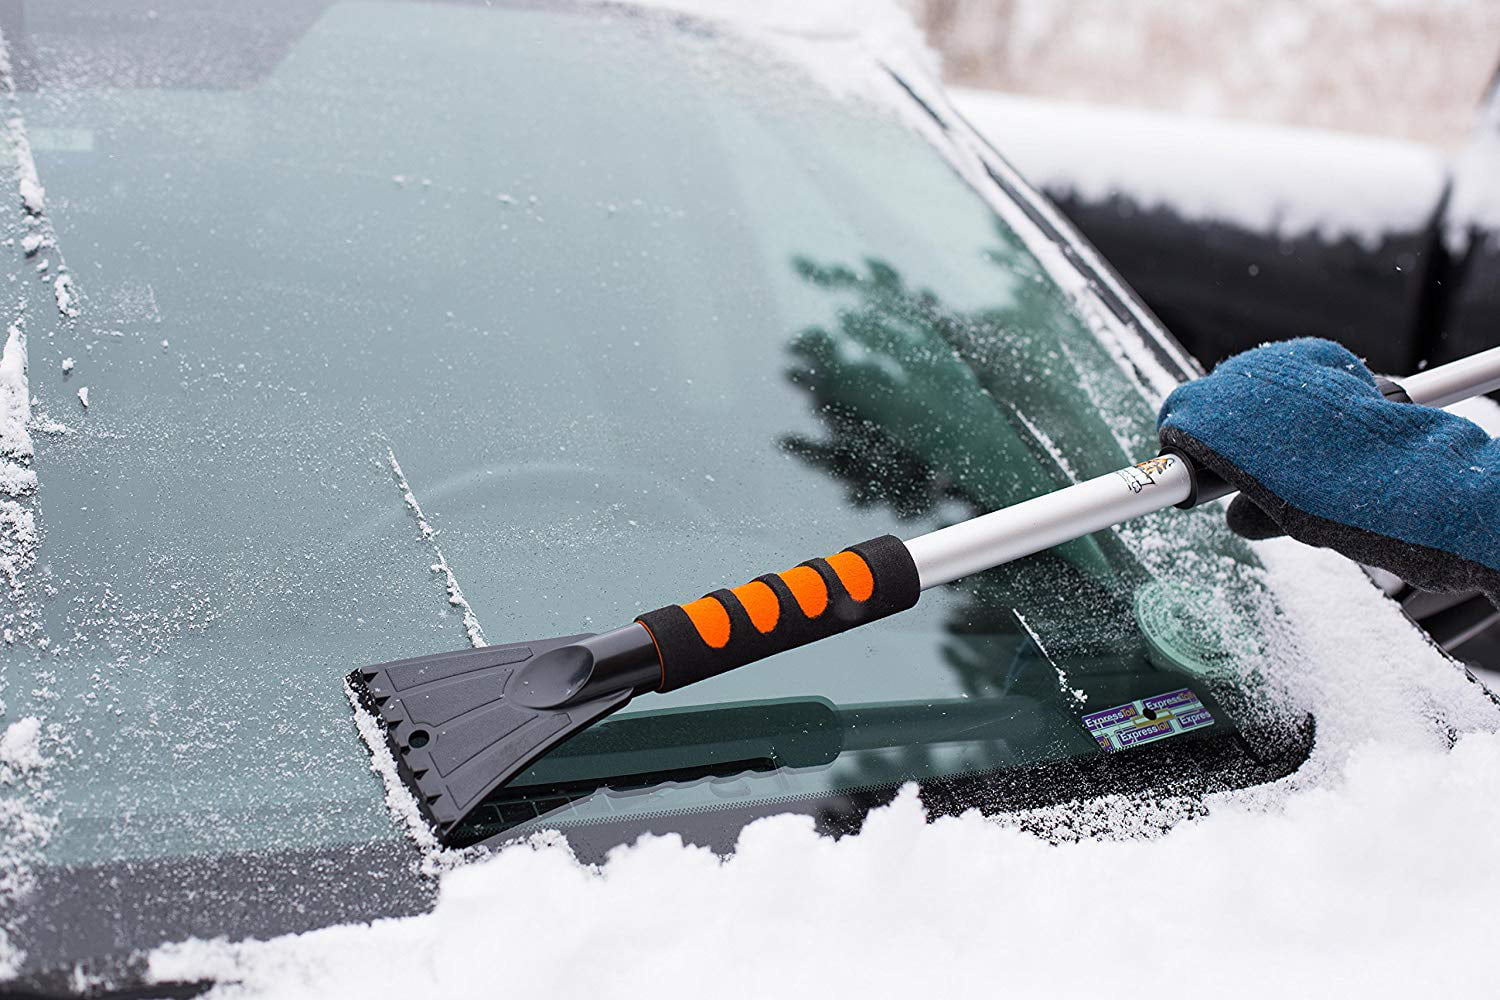 Qsnn Ice Scraper Car with Snow Brush Telescopic Ice Scraper for Cars Truck SUV Windscreen Garden Shed Car Winter Accessories 2 in 1 Snow Scraper Long Handle Car Broom with Towel 